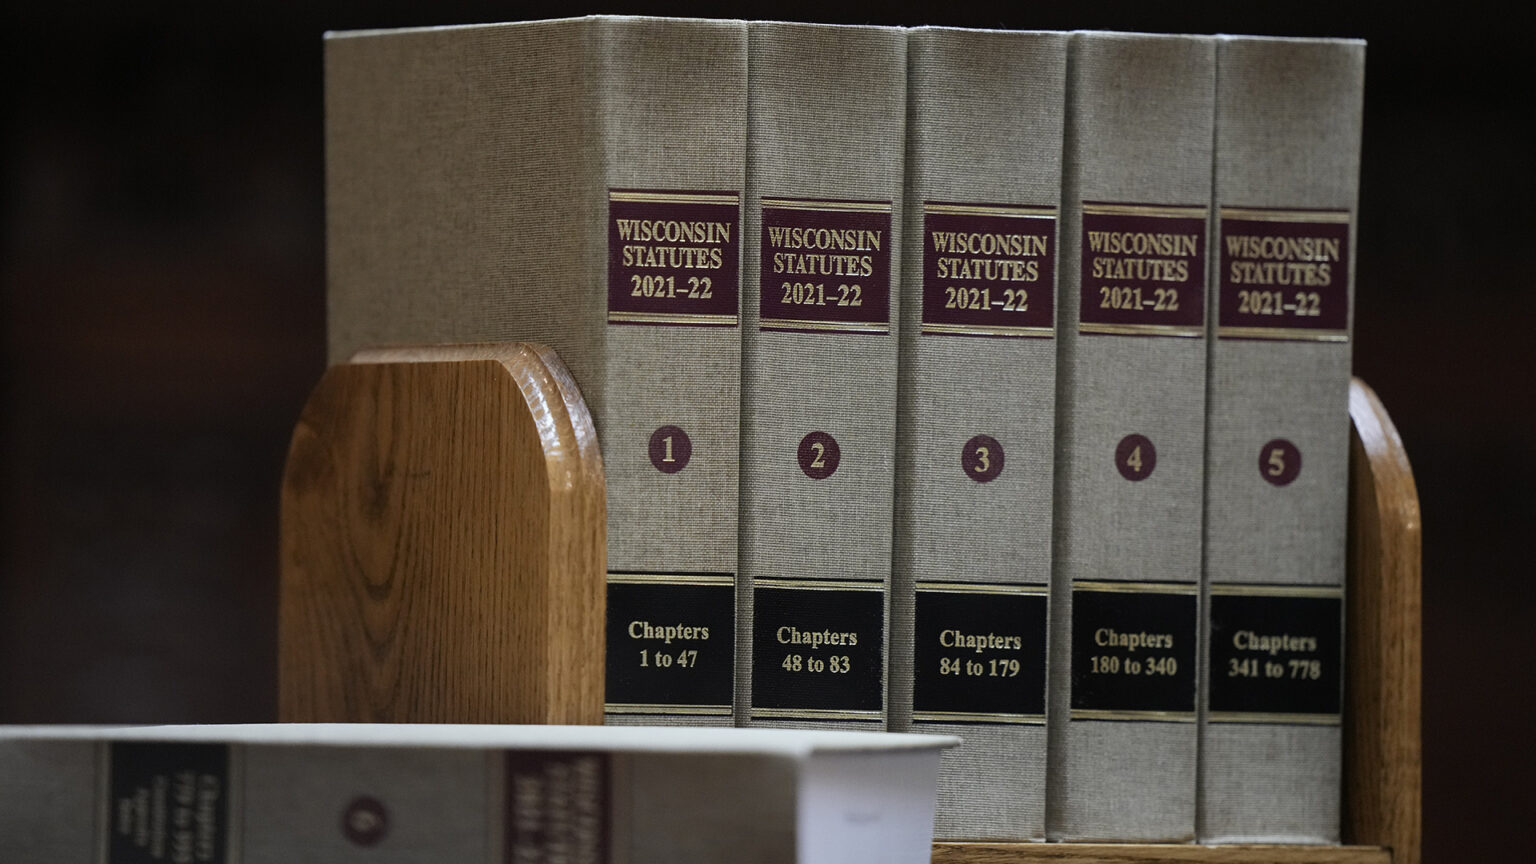 A row of five cloth-bound books with the title Wisconsin Statutes 2021-22, with labels marking the volume number and chapters included stand on a small wood bookshelf, with another book resting on its side and out-of-focus in the foreground.